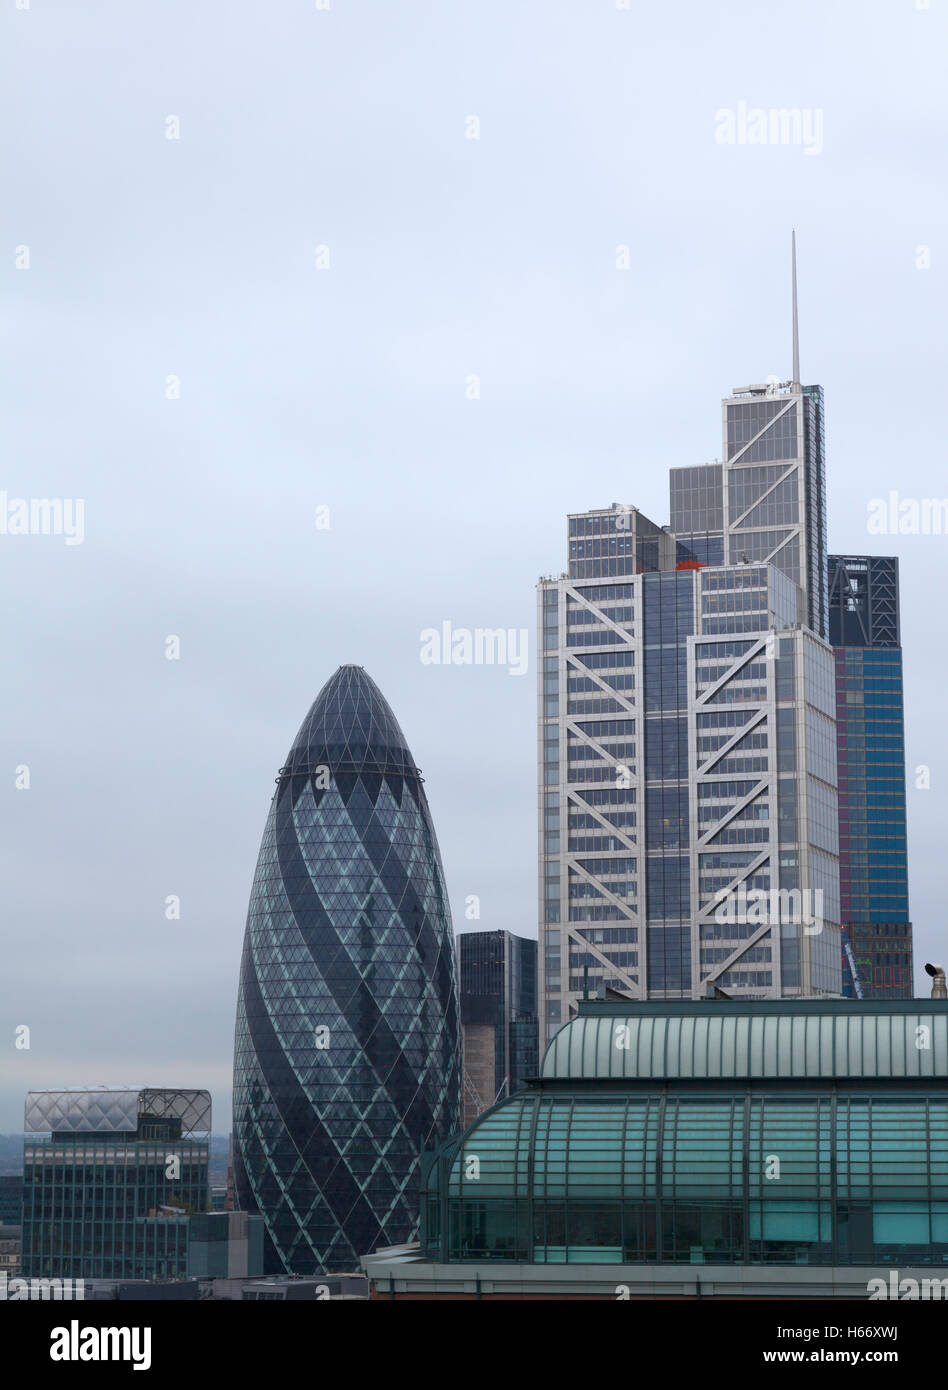 City of London famous landmark skyscrapers on an overcast day Stock Photo